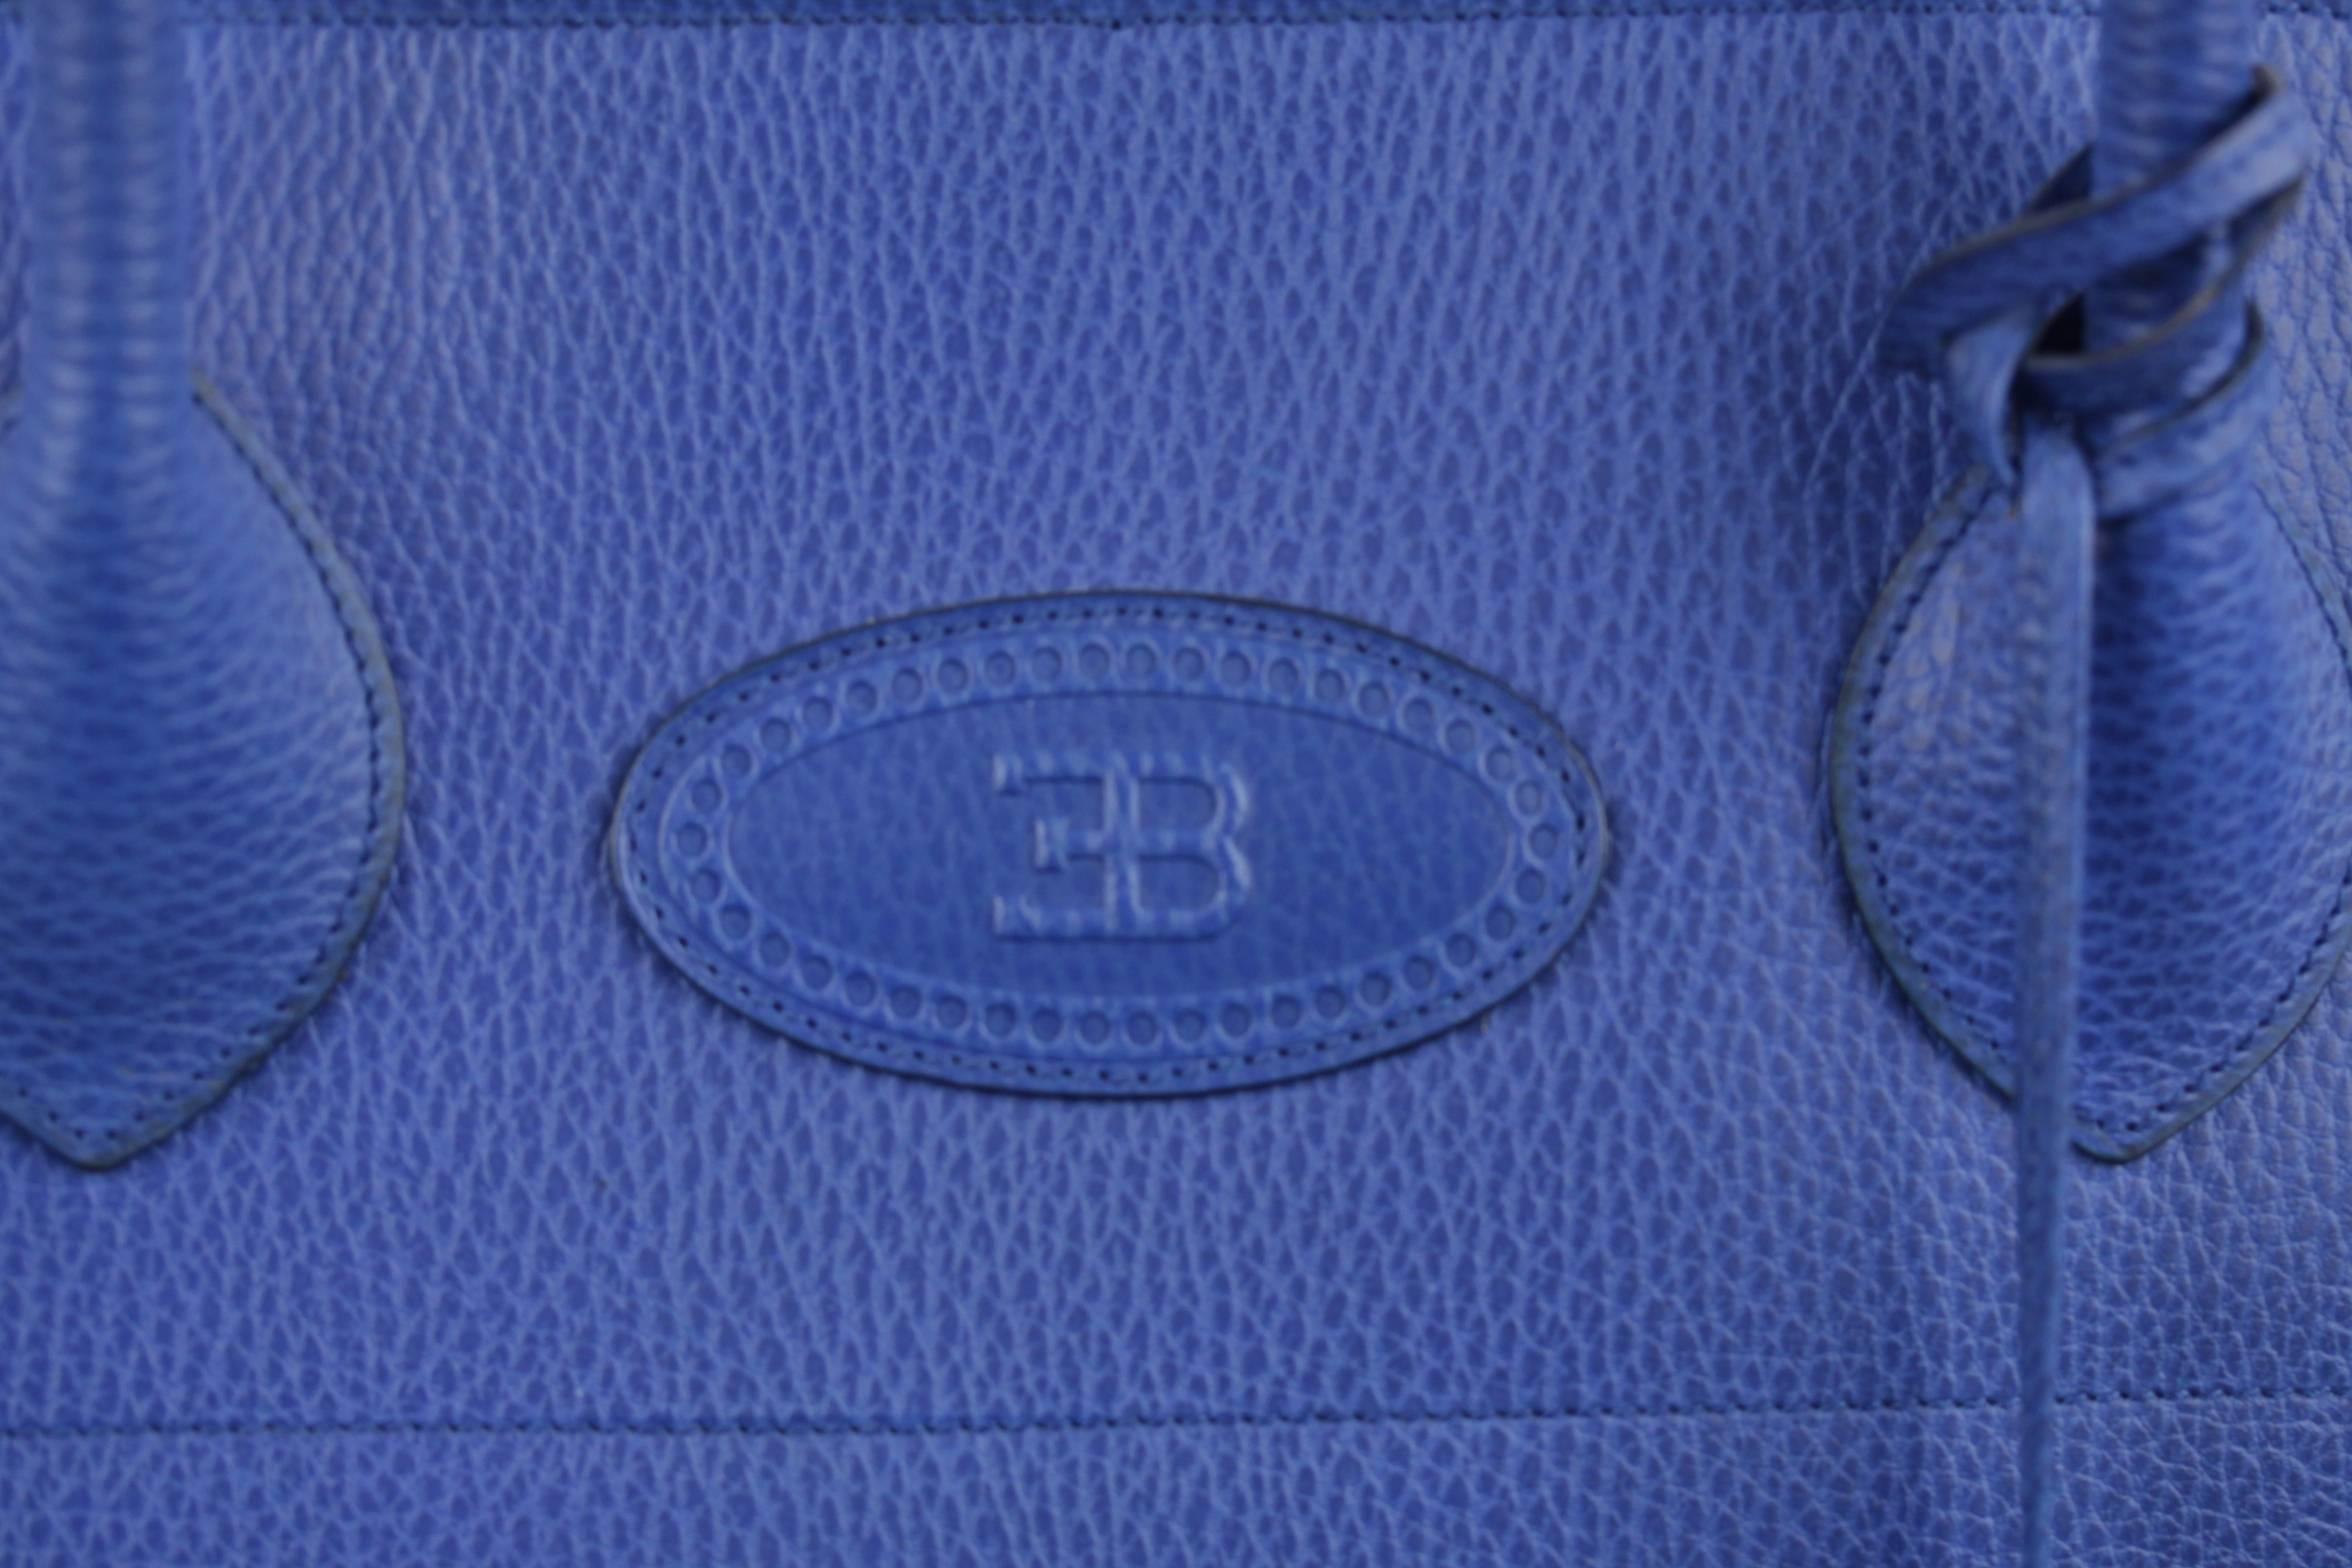  - Limited edition, numbered, large ETTORE BUGATTI satchel from the early 90s

- Crafted in genuine leather in an elegant electric blu color

- Its rounded line reproduced the curve of a Bugatti car's grille, the distinctive 'horseshoe